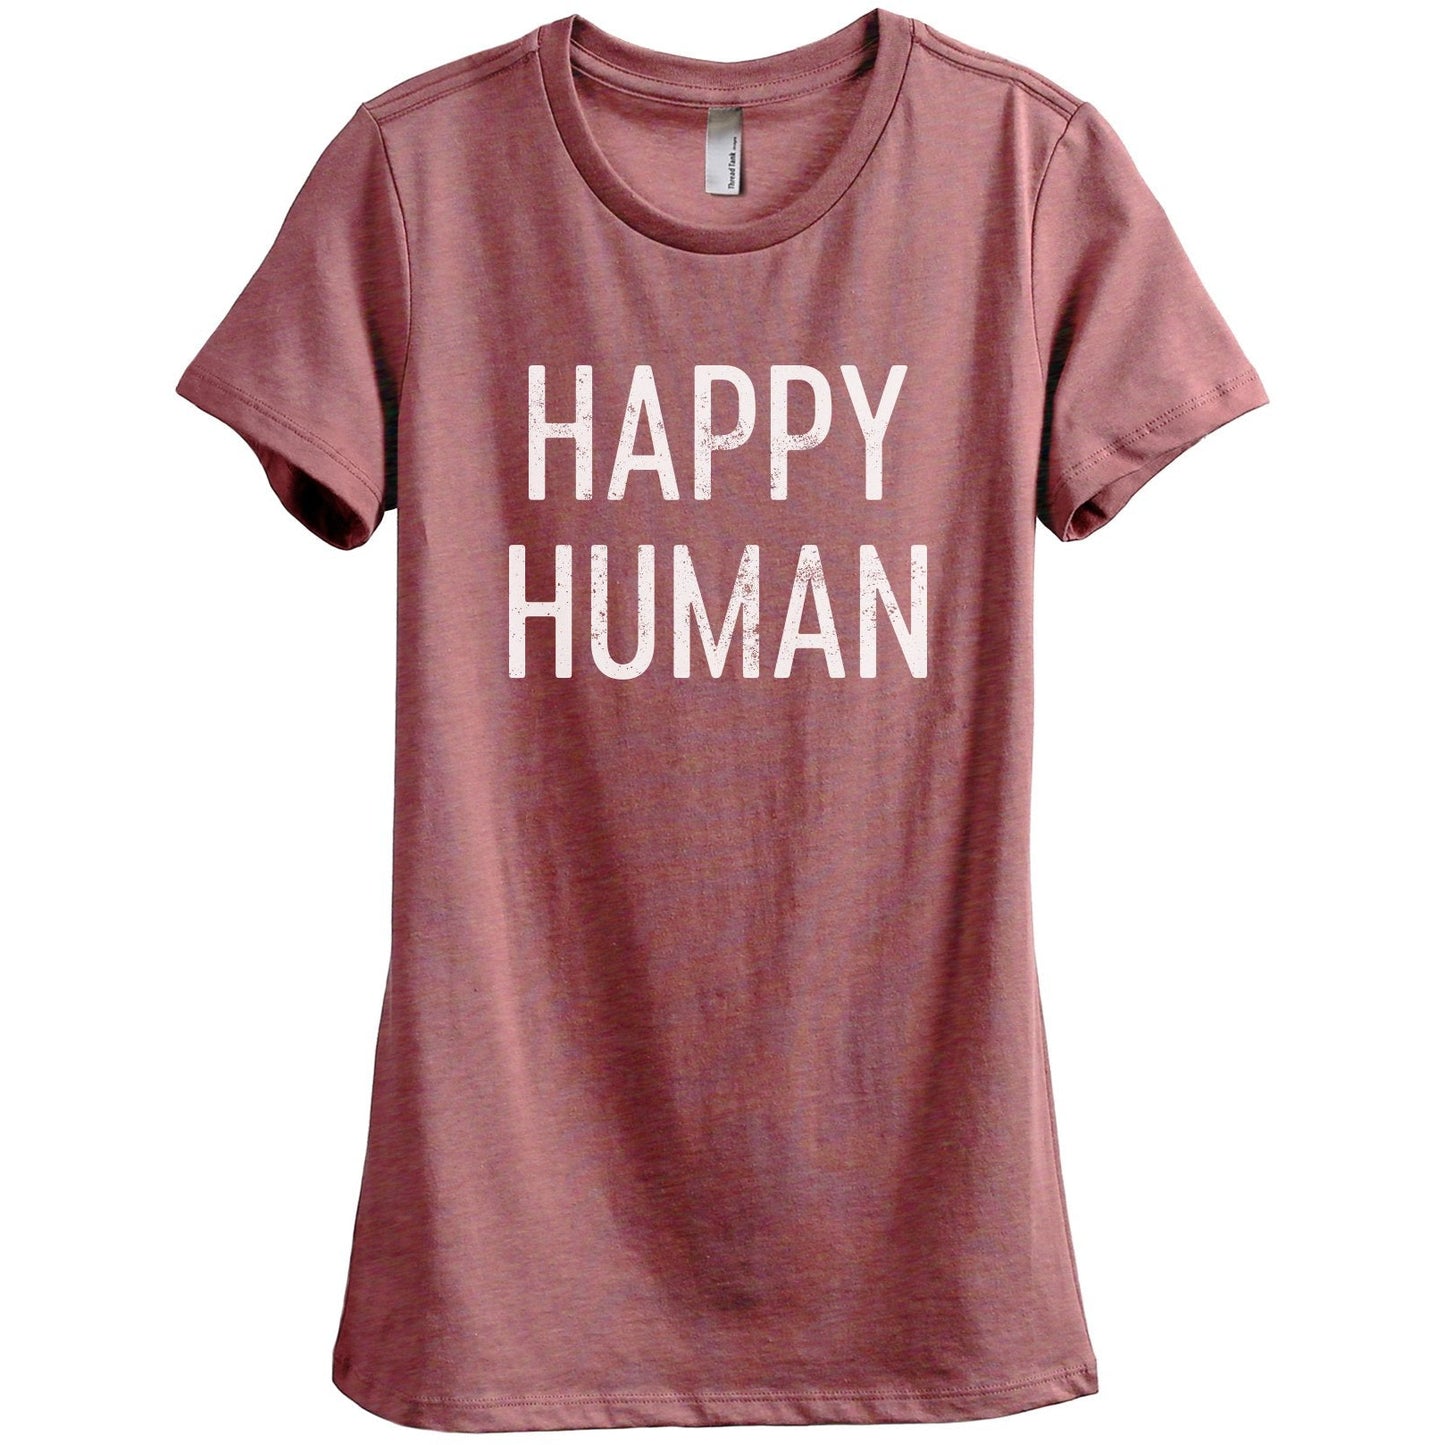 Happy Human Women's Relaxed Crewneck T-Shirt Top Tee Heather Rouge
